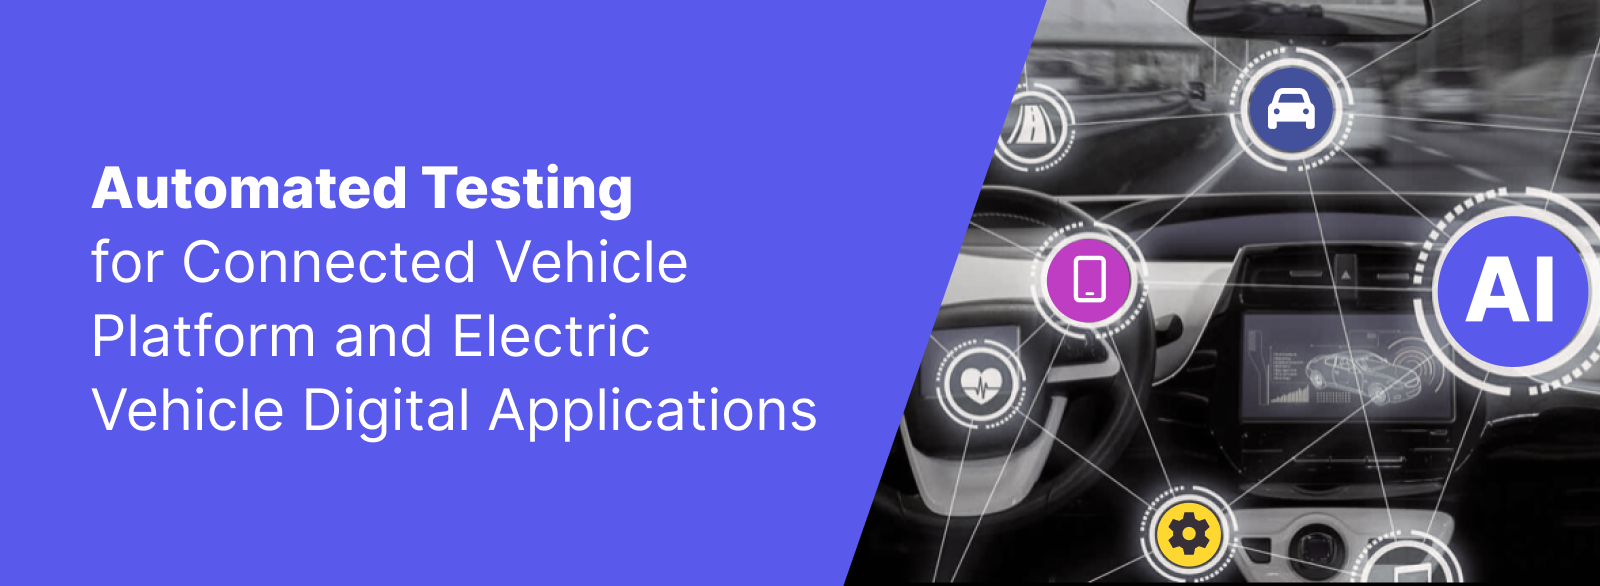 katalon-success-stories-automated-testing-for-connected-vehicle-platform-and-electric-vehicle-digital-applications